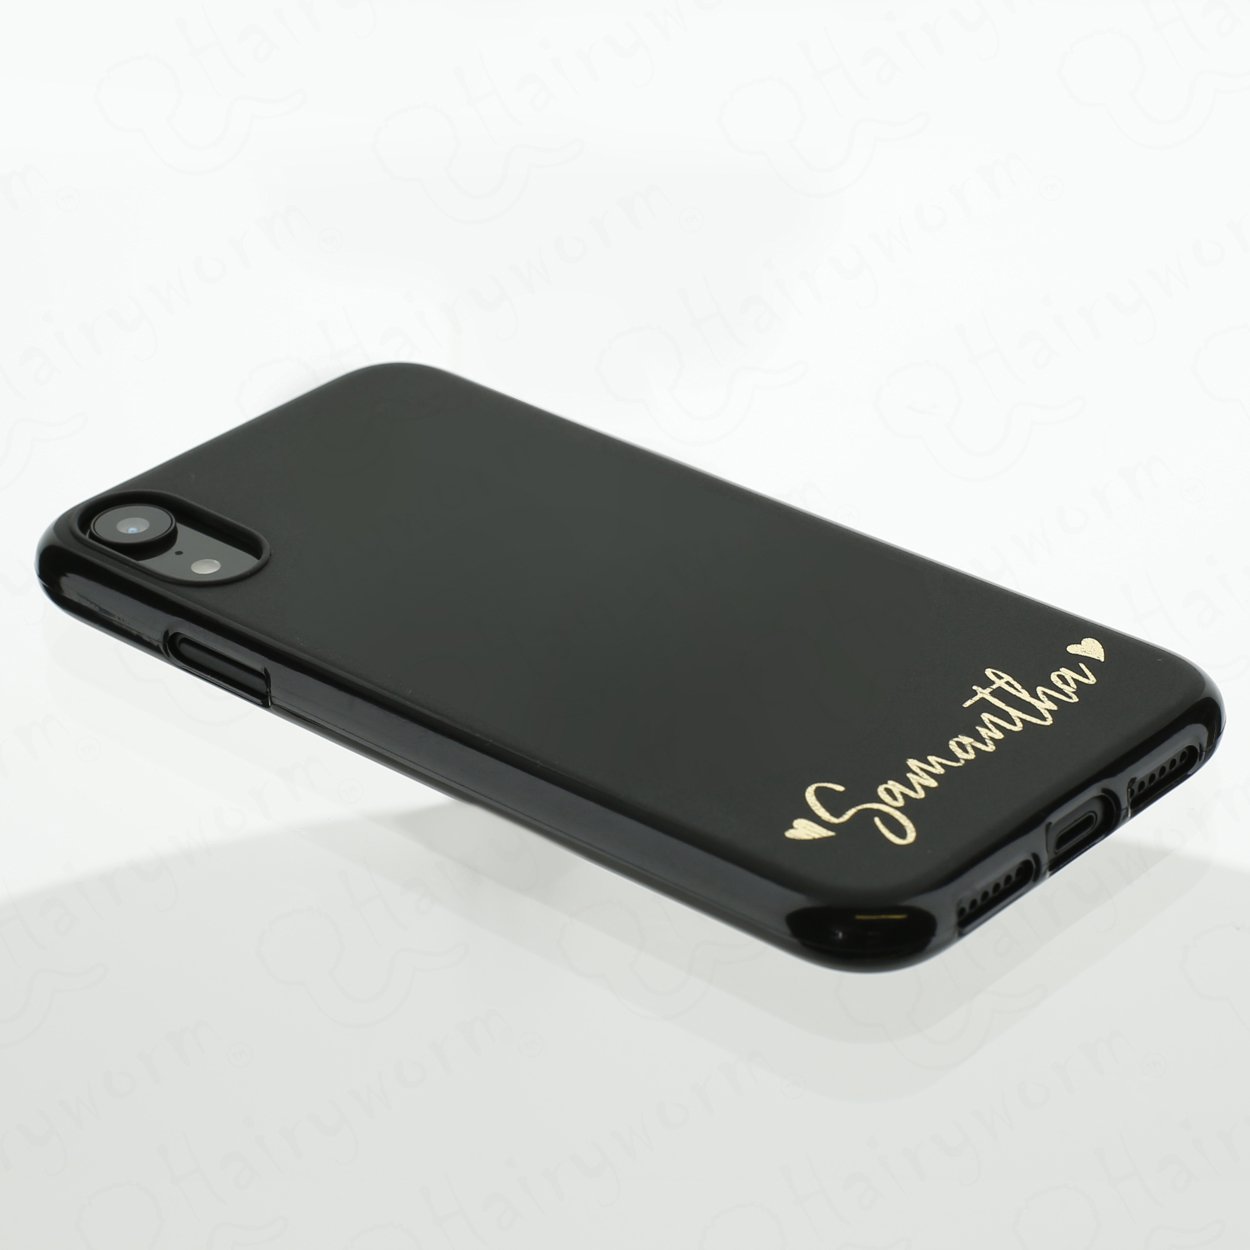 Personalised Honor Phone Gel Case with Centralised Block Initials